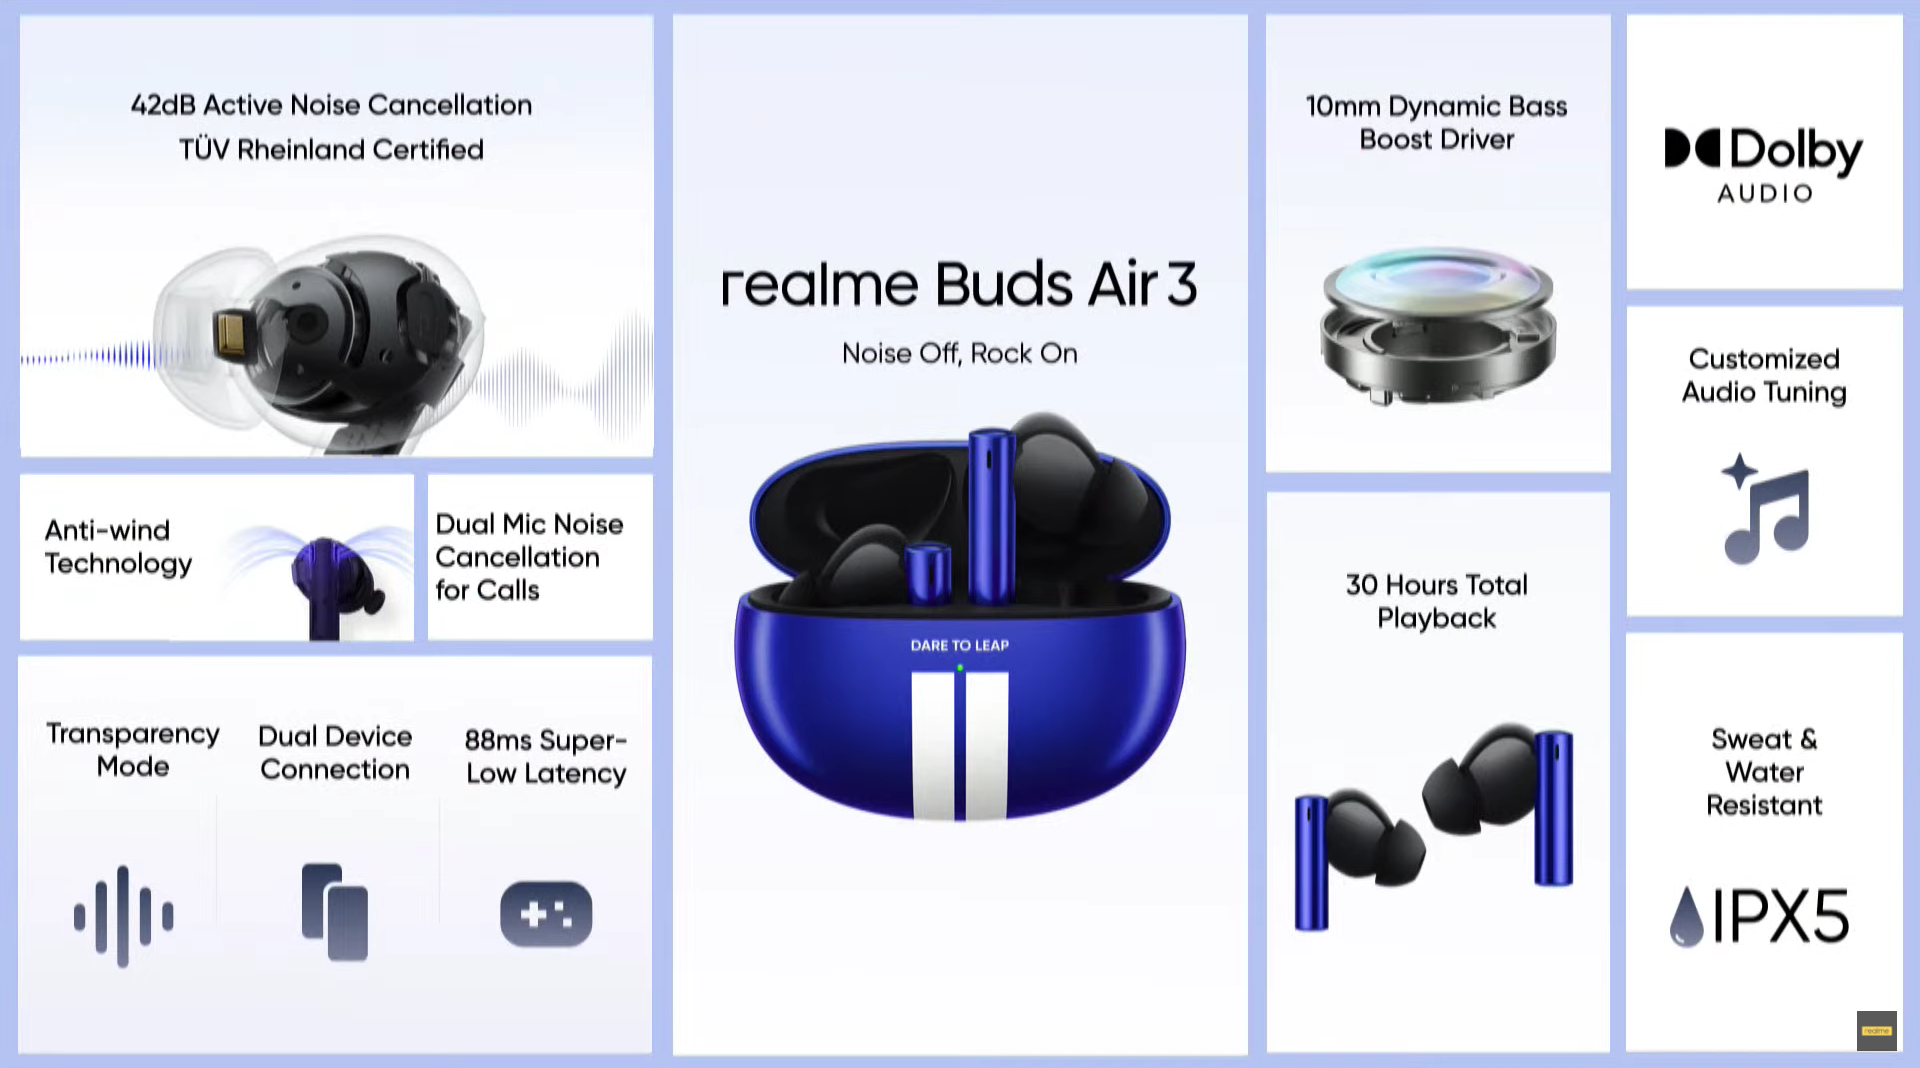 Realme Buds Air 5 Review: Hits the right notes, realme buds air 5 pro 